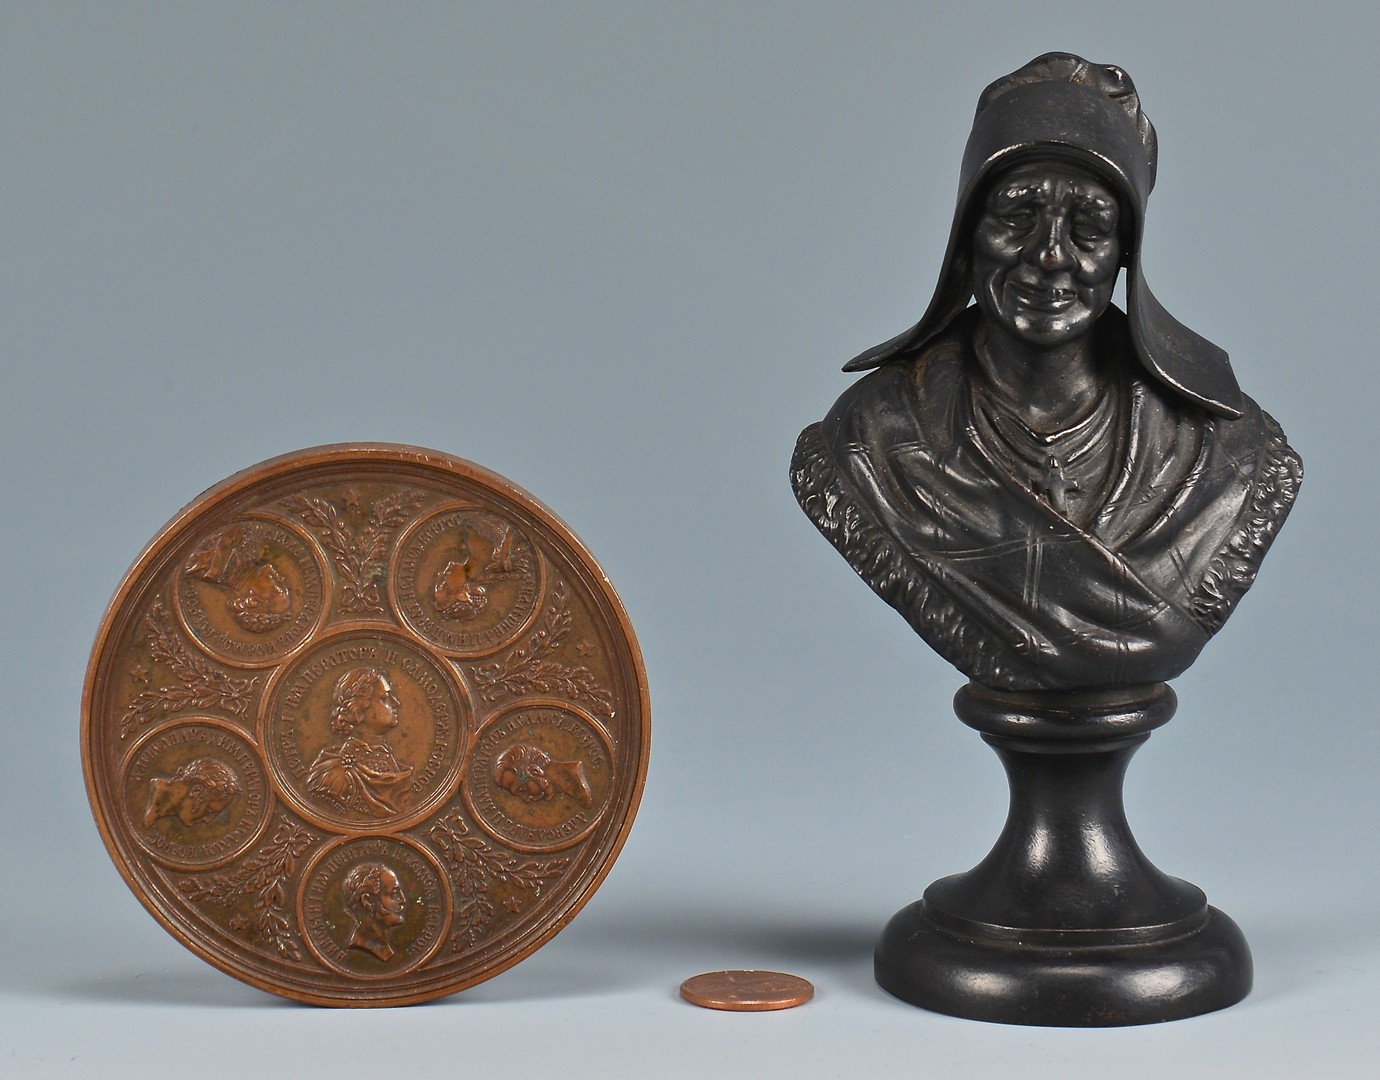 Lot 231: Two Russian Themed Decorative Items